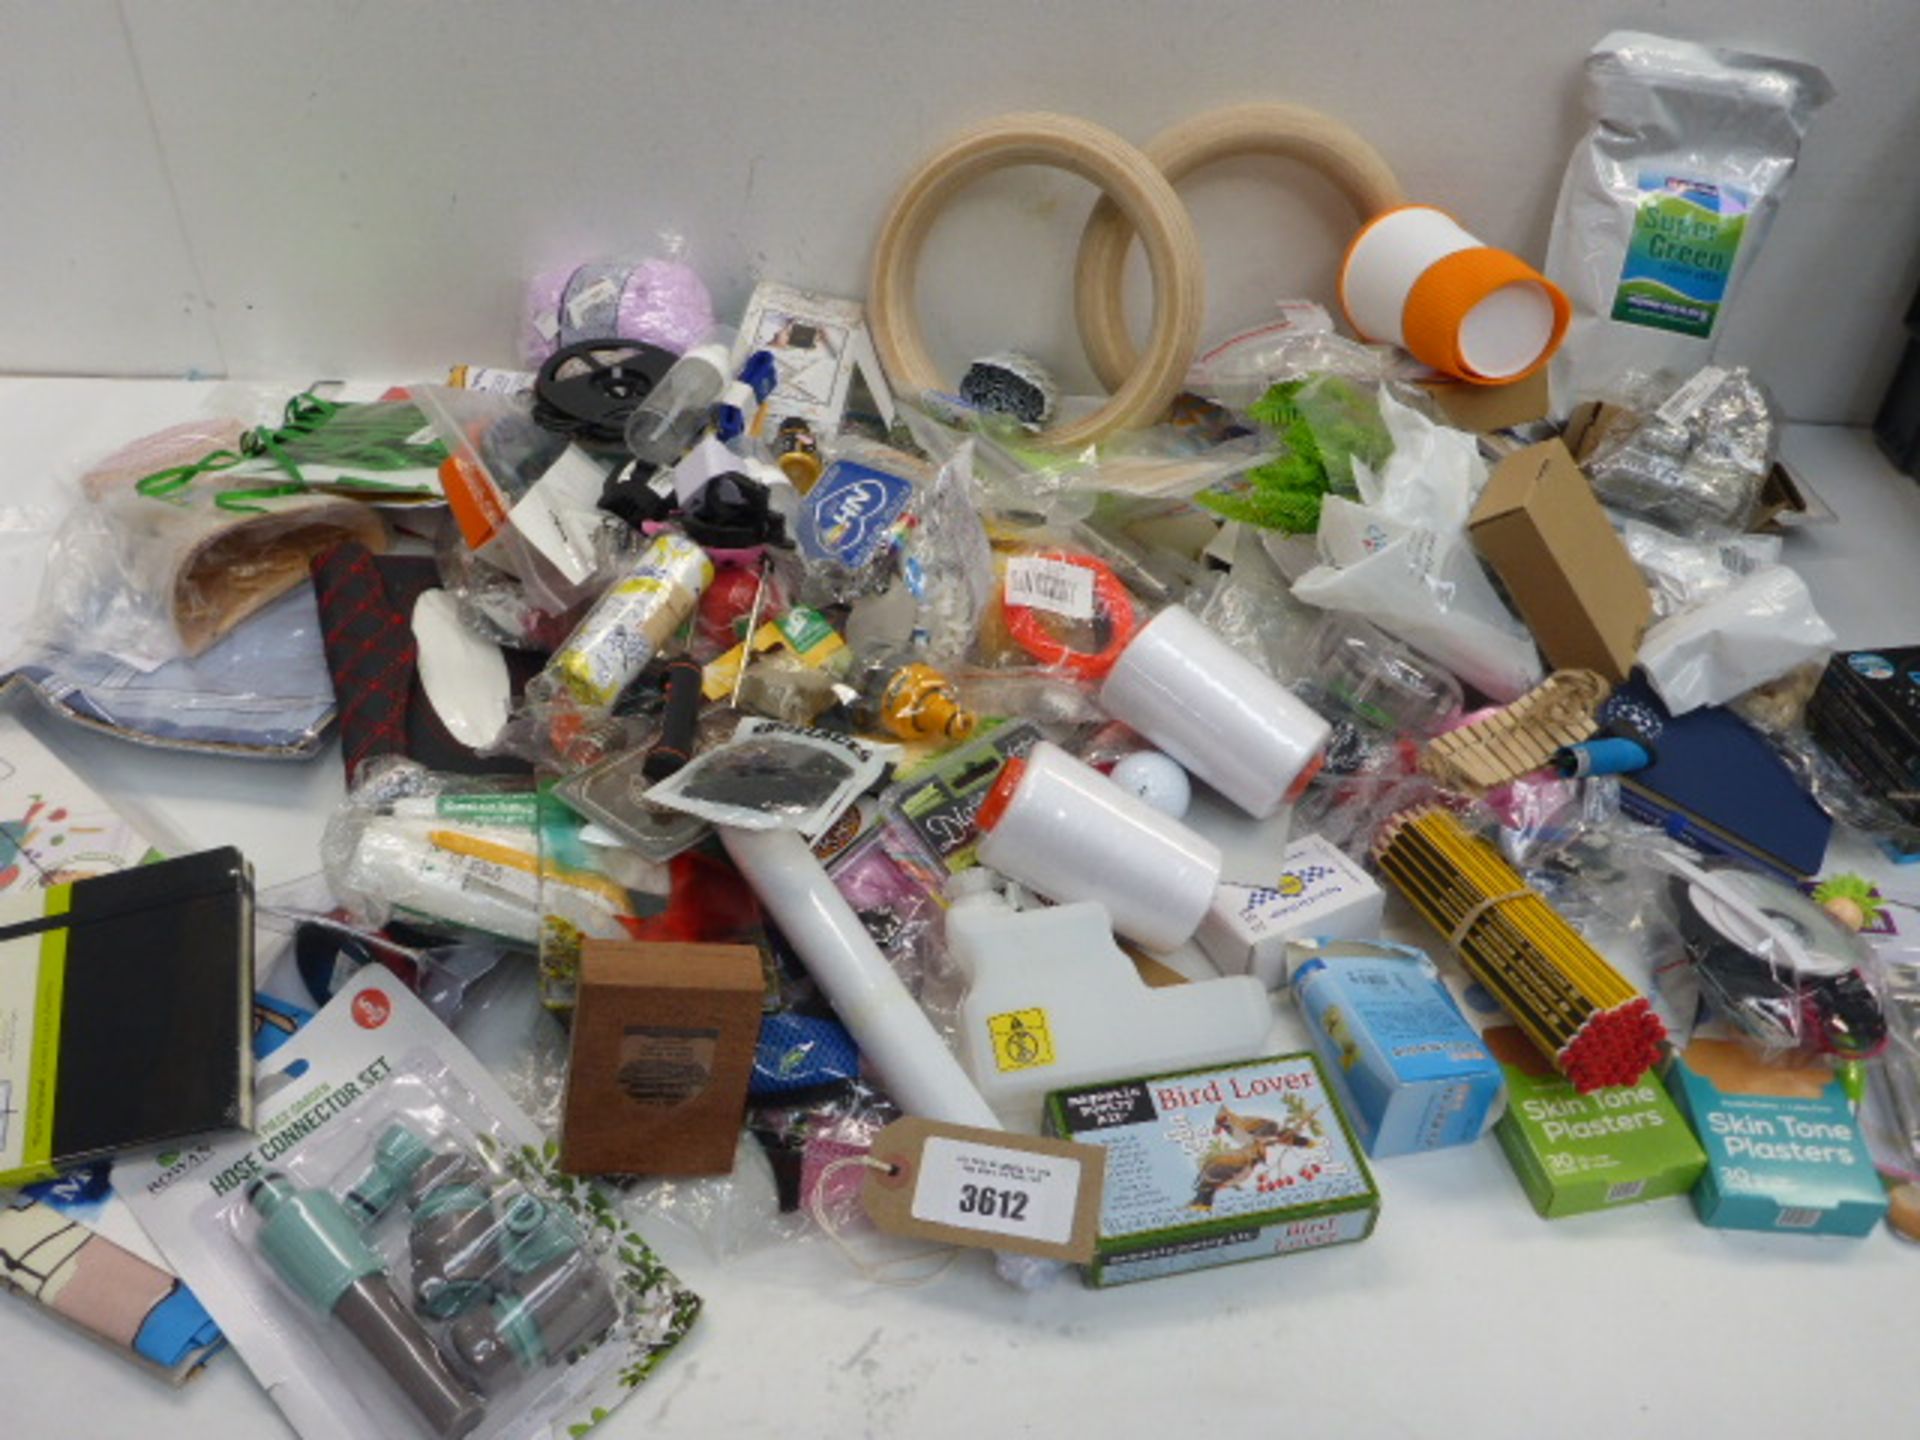 Large bag of household sundries including lawn seed, paint, hose attachments, plasters, tea towel,